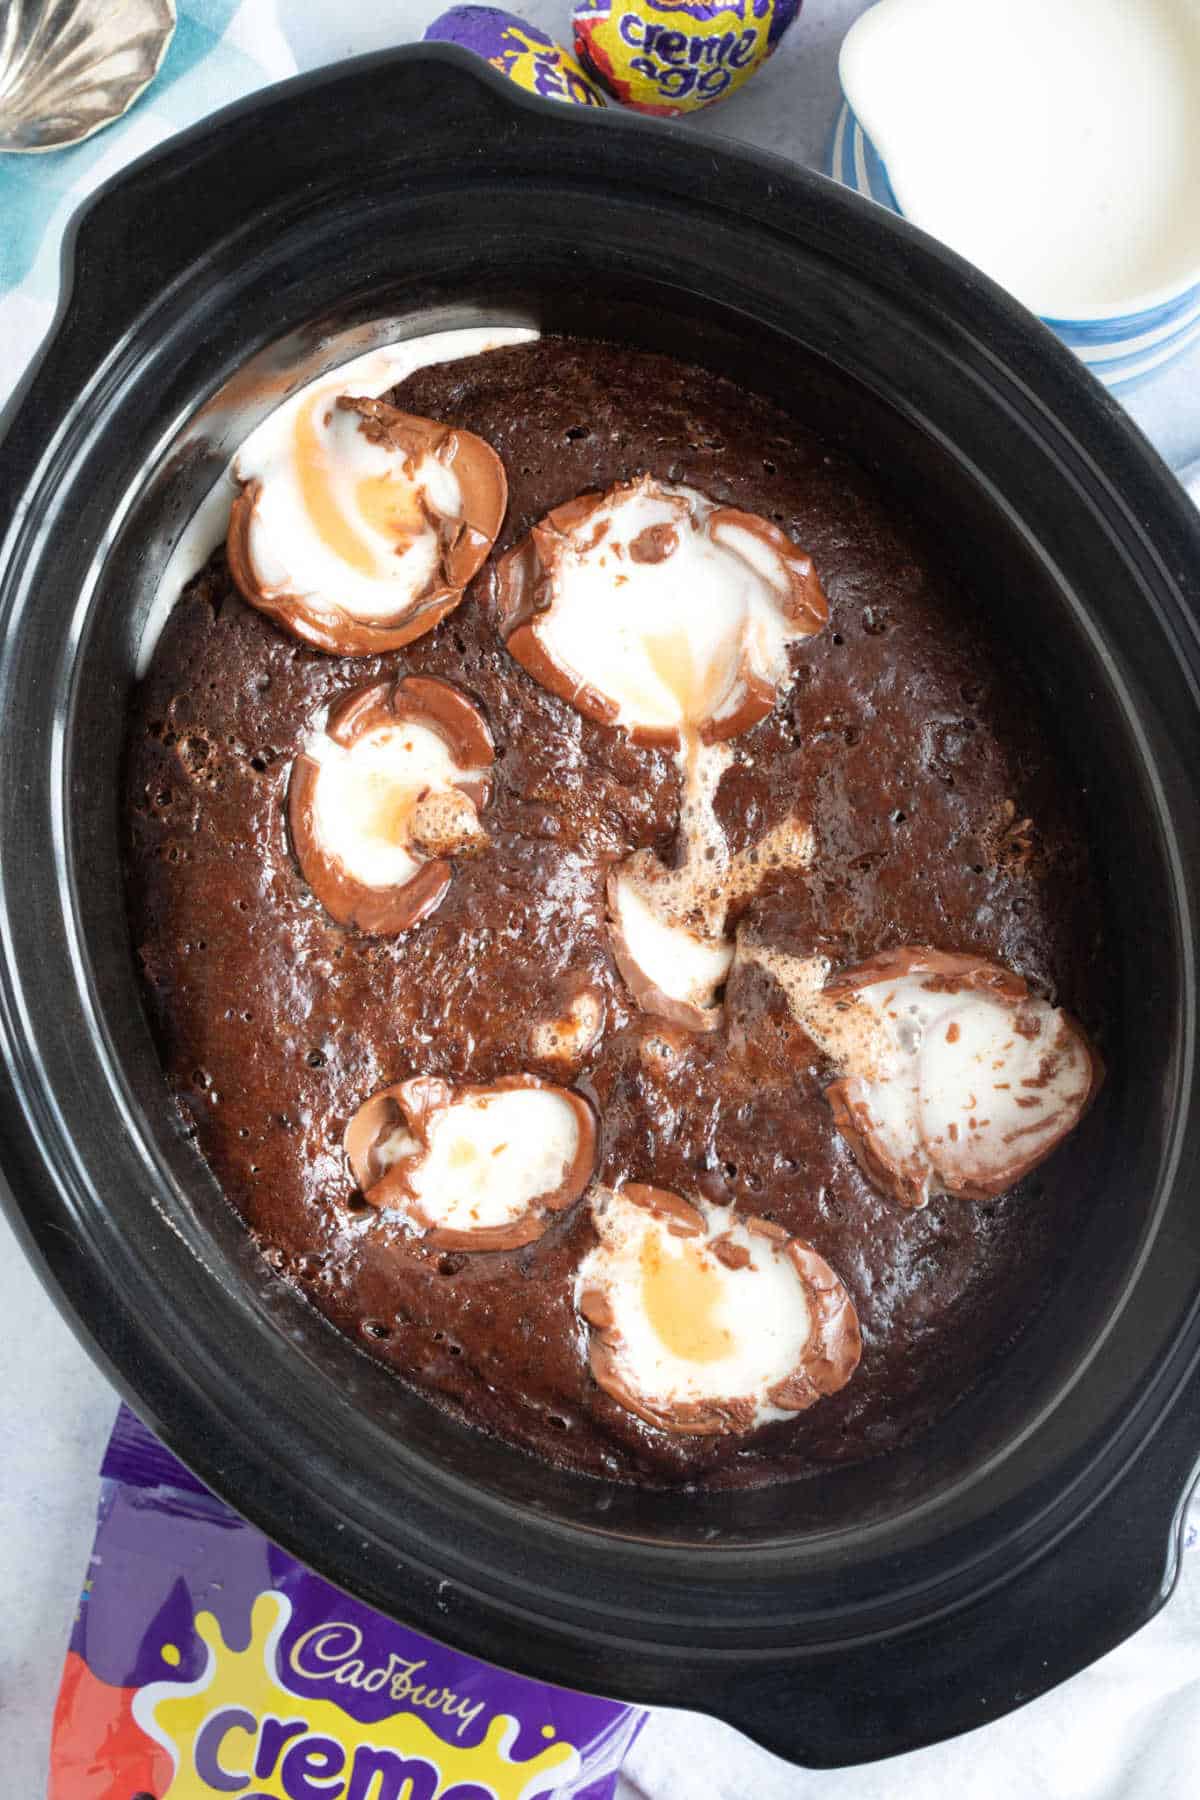 Slow cooker chocolate creme egg pudding in a black slow cooker basin.